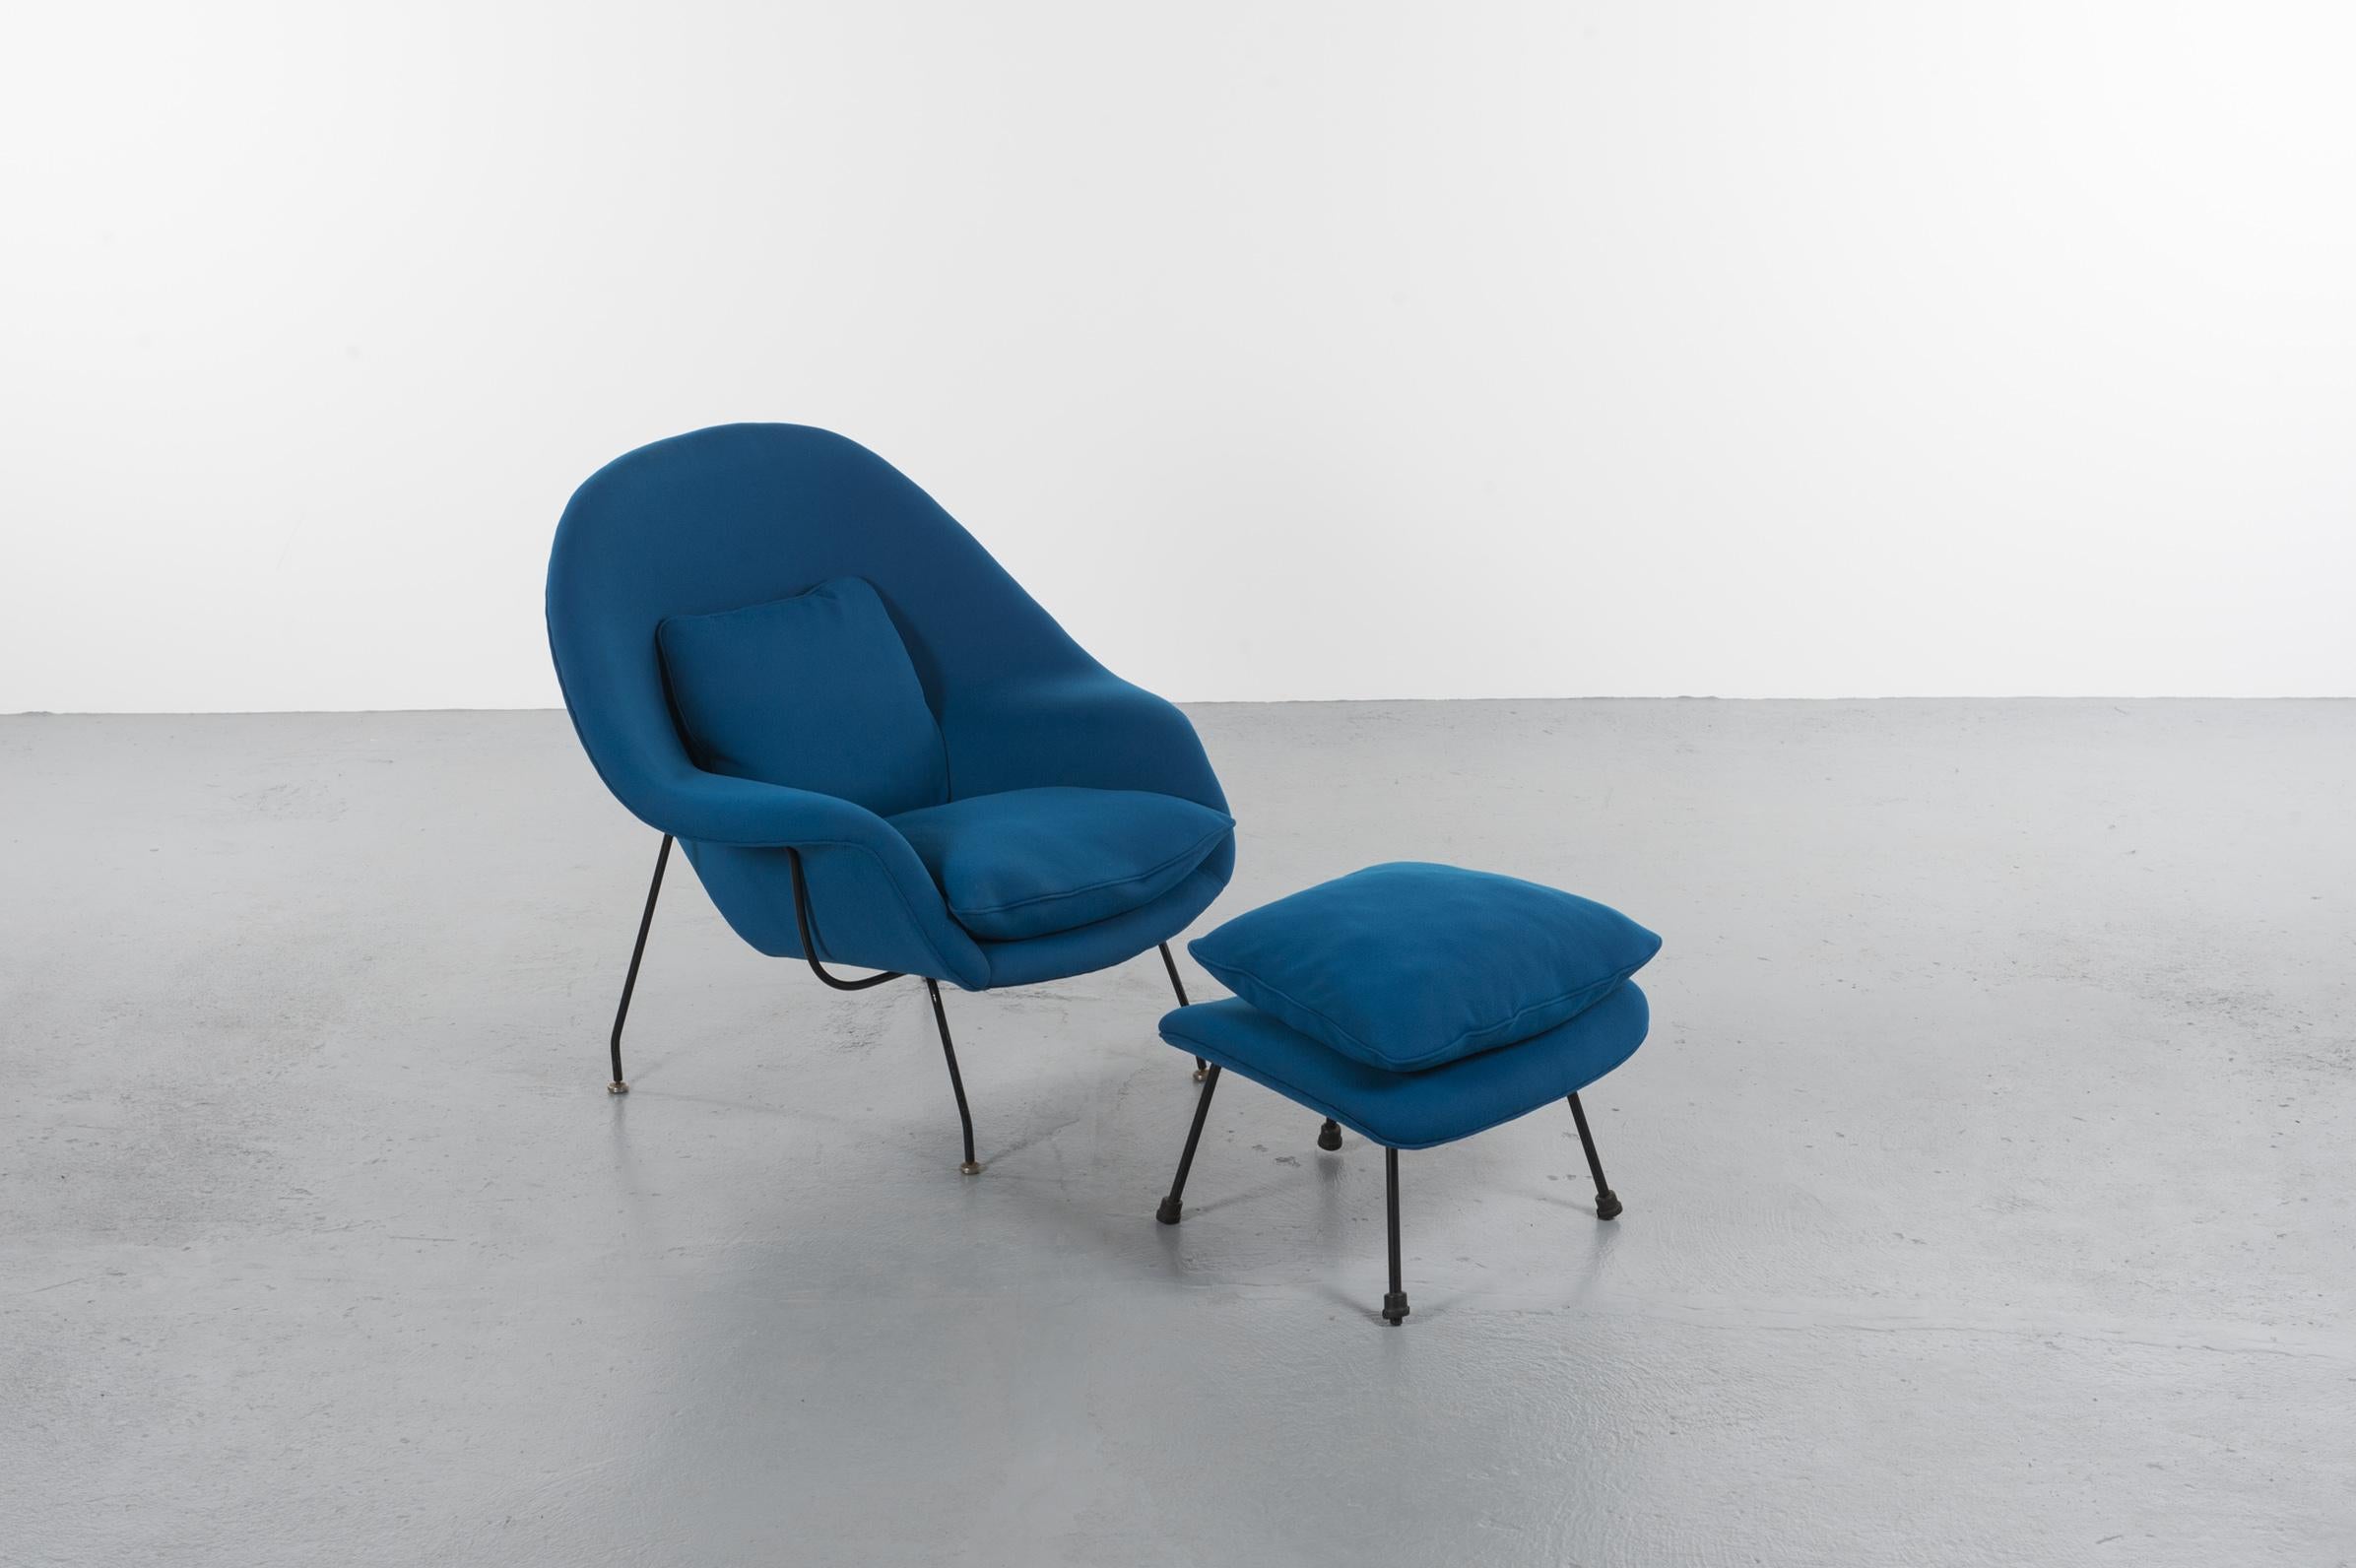 The womb armchair with its original ottoman by Eero Saarinen Edited by Knoll/Wohnbedarf.

This is the first European edition with the original metal structure. Since fiber glass was not in use in Europe, the shell of this pieceed is in a perforated